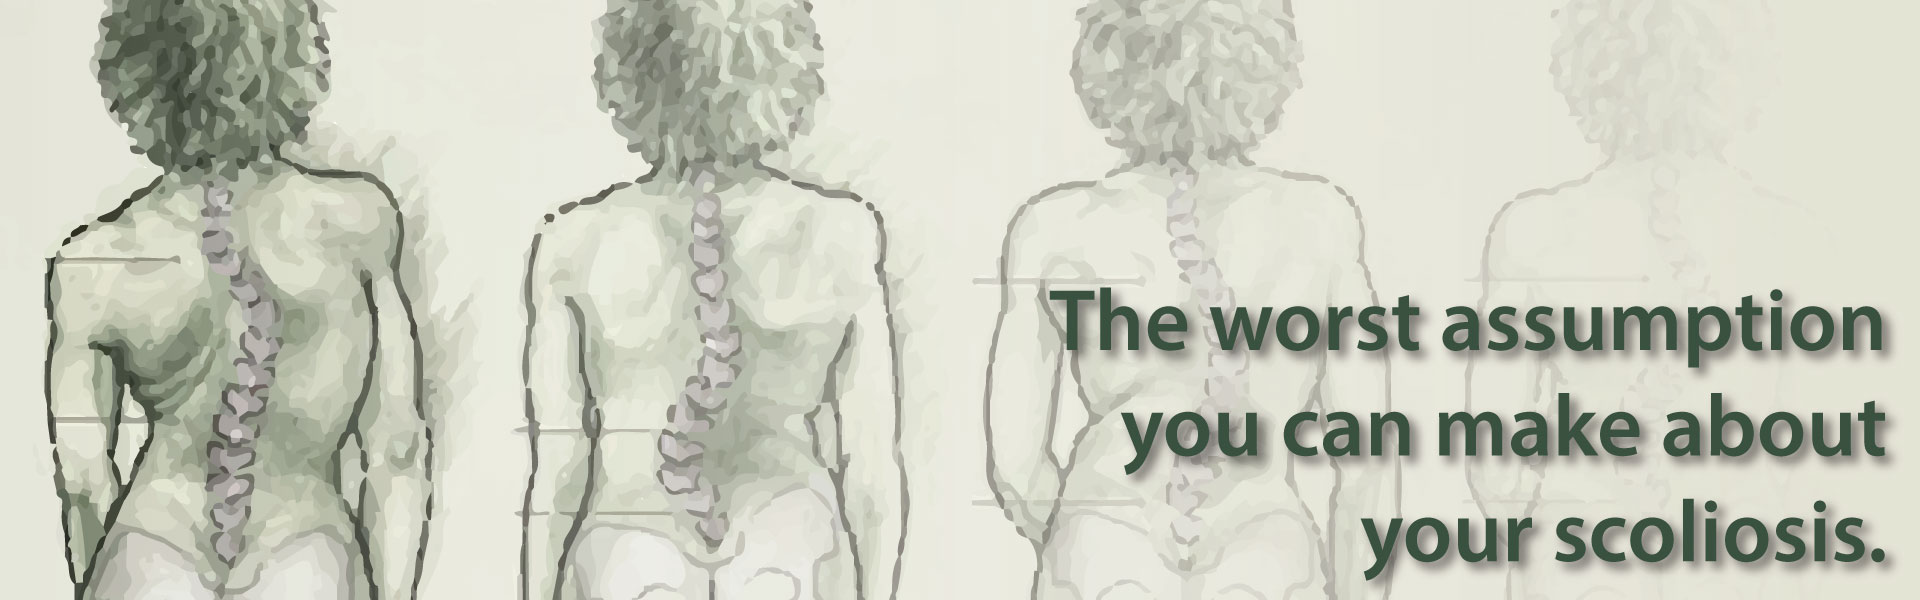 scoliosis treatment banner